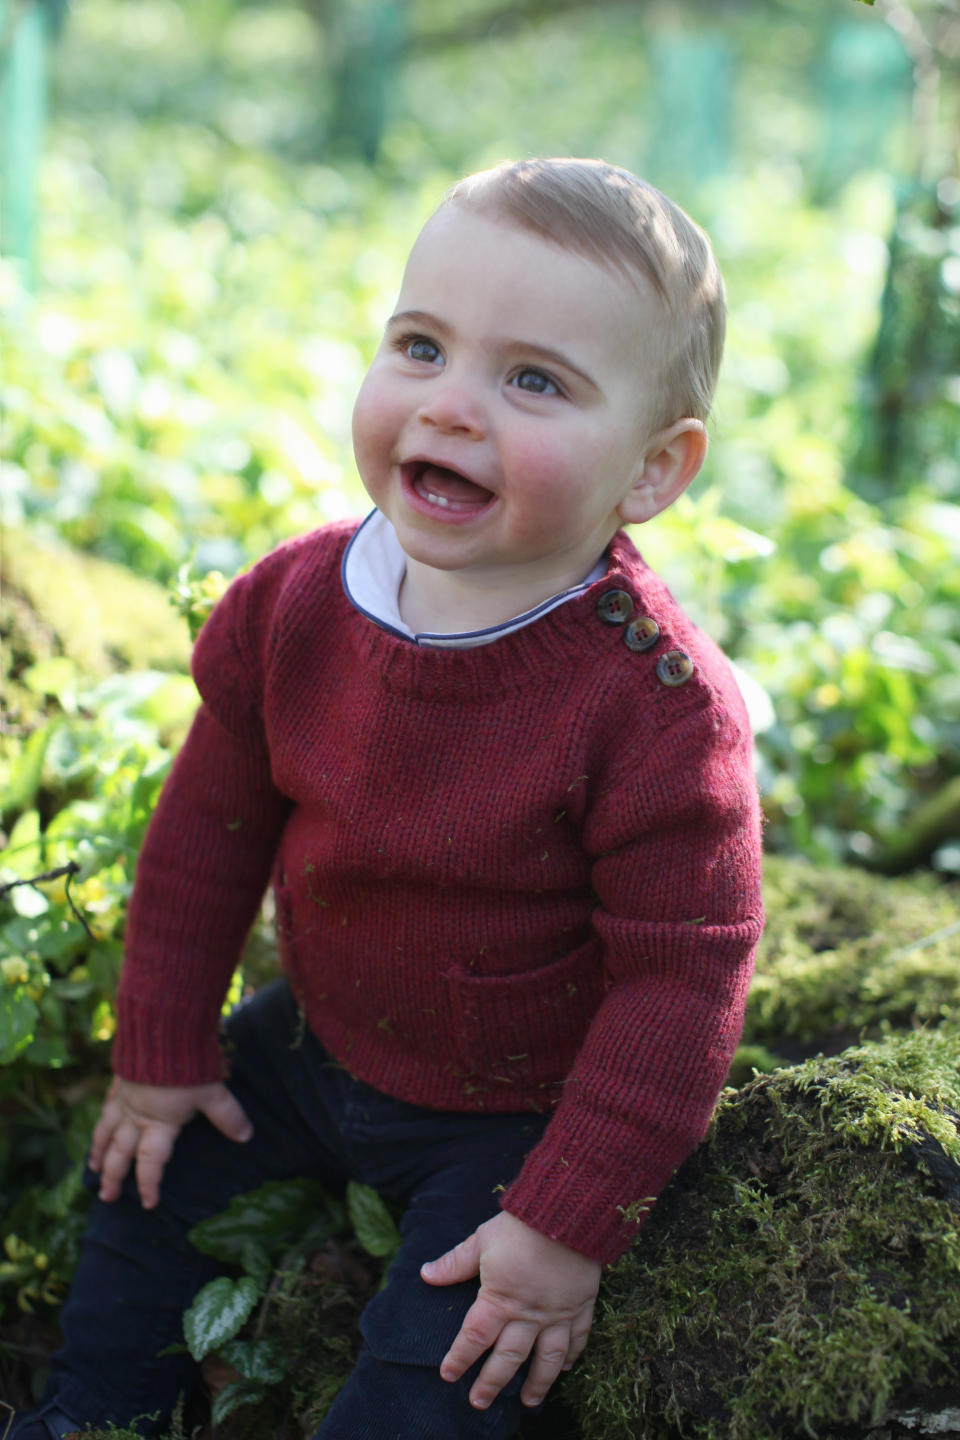 He looks to be wearing one of his big brother Prince George’s hand-me-downs – a Rachel Riley Peter Pan collar shirt – under a burgundy marl knitted jumper with three-button shoulder detailing. Photo: AAP